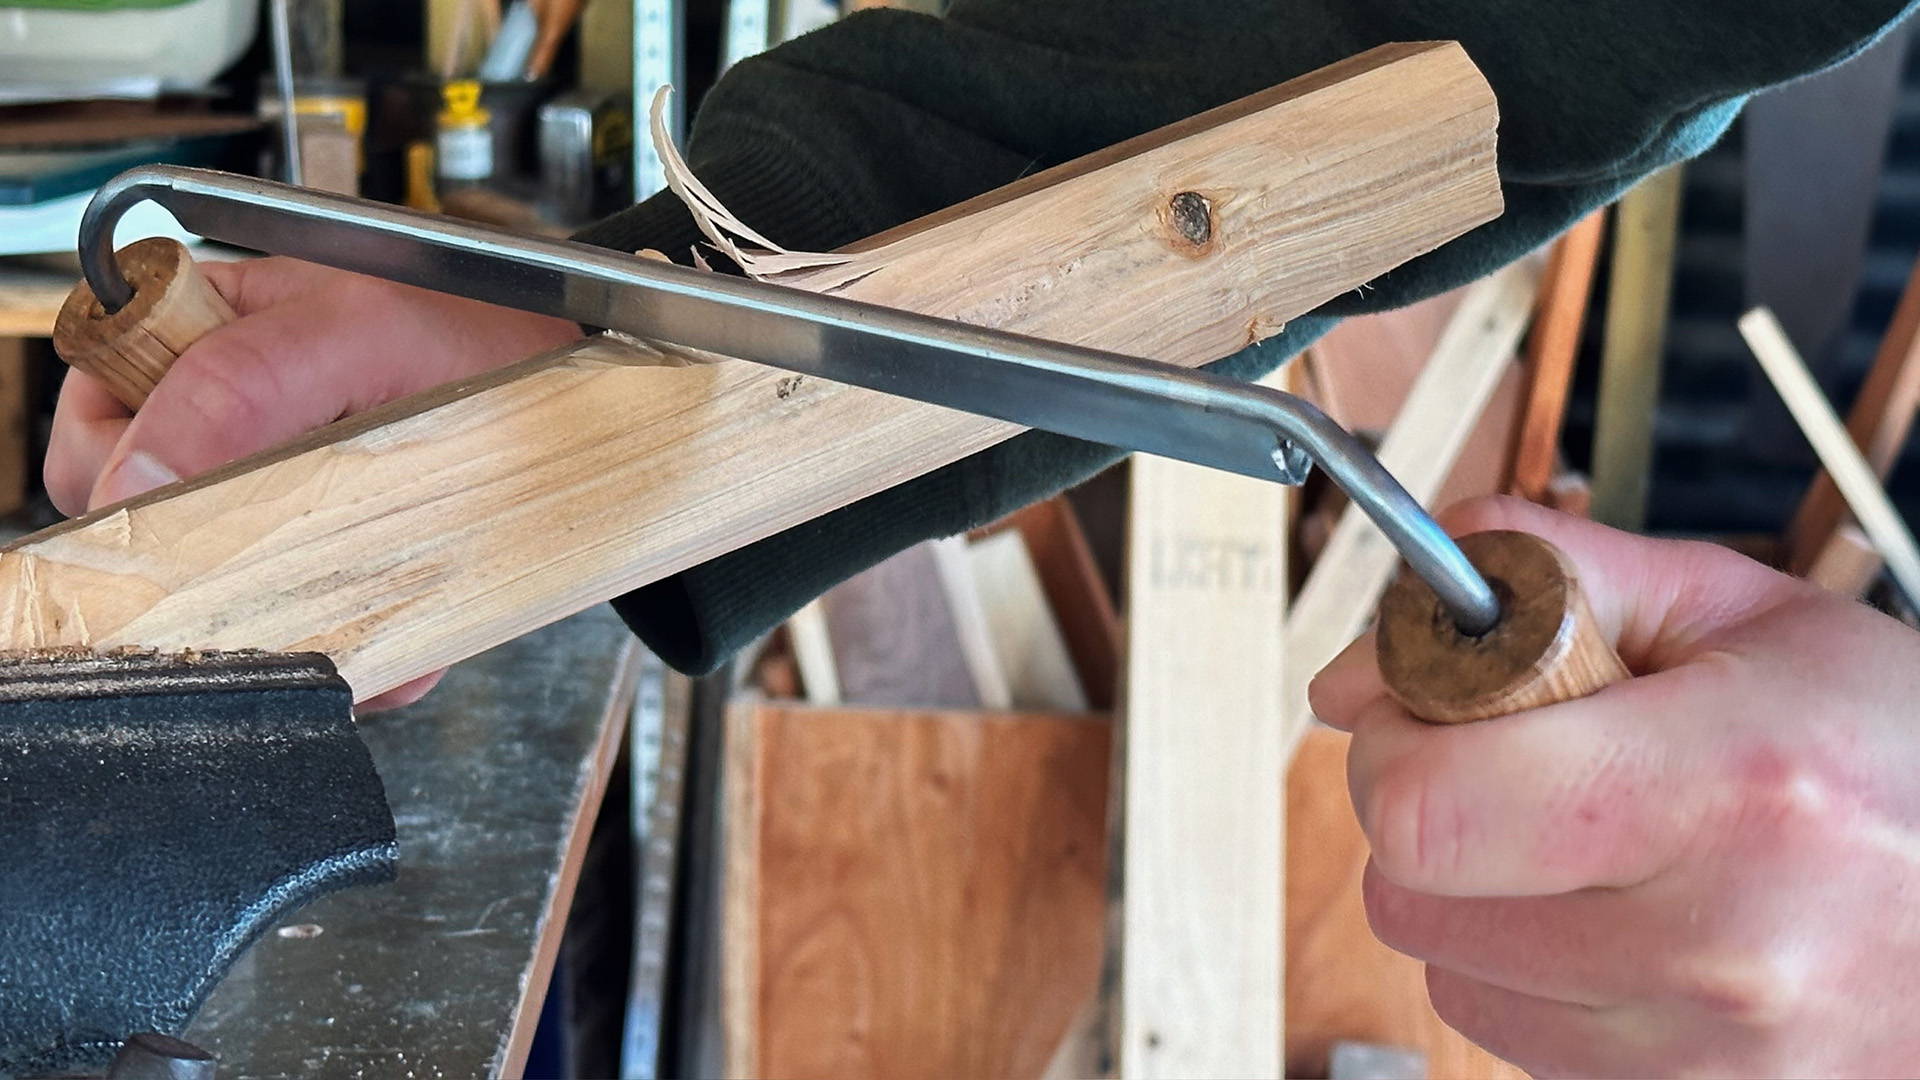 Drawknife Basics: The Surprisingly Versatile Hand Tool You Should be Using